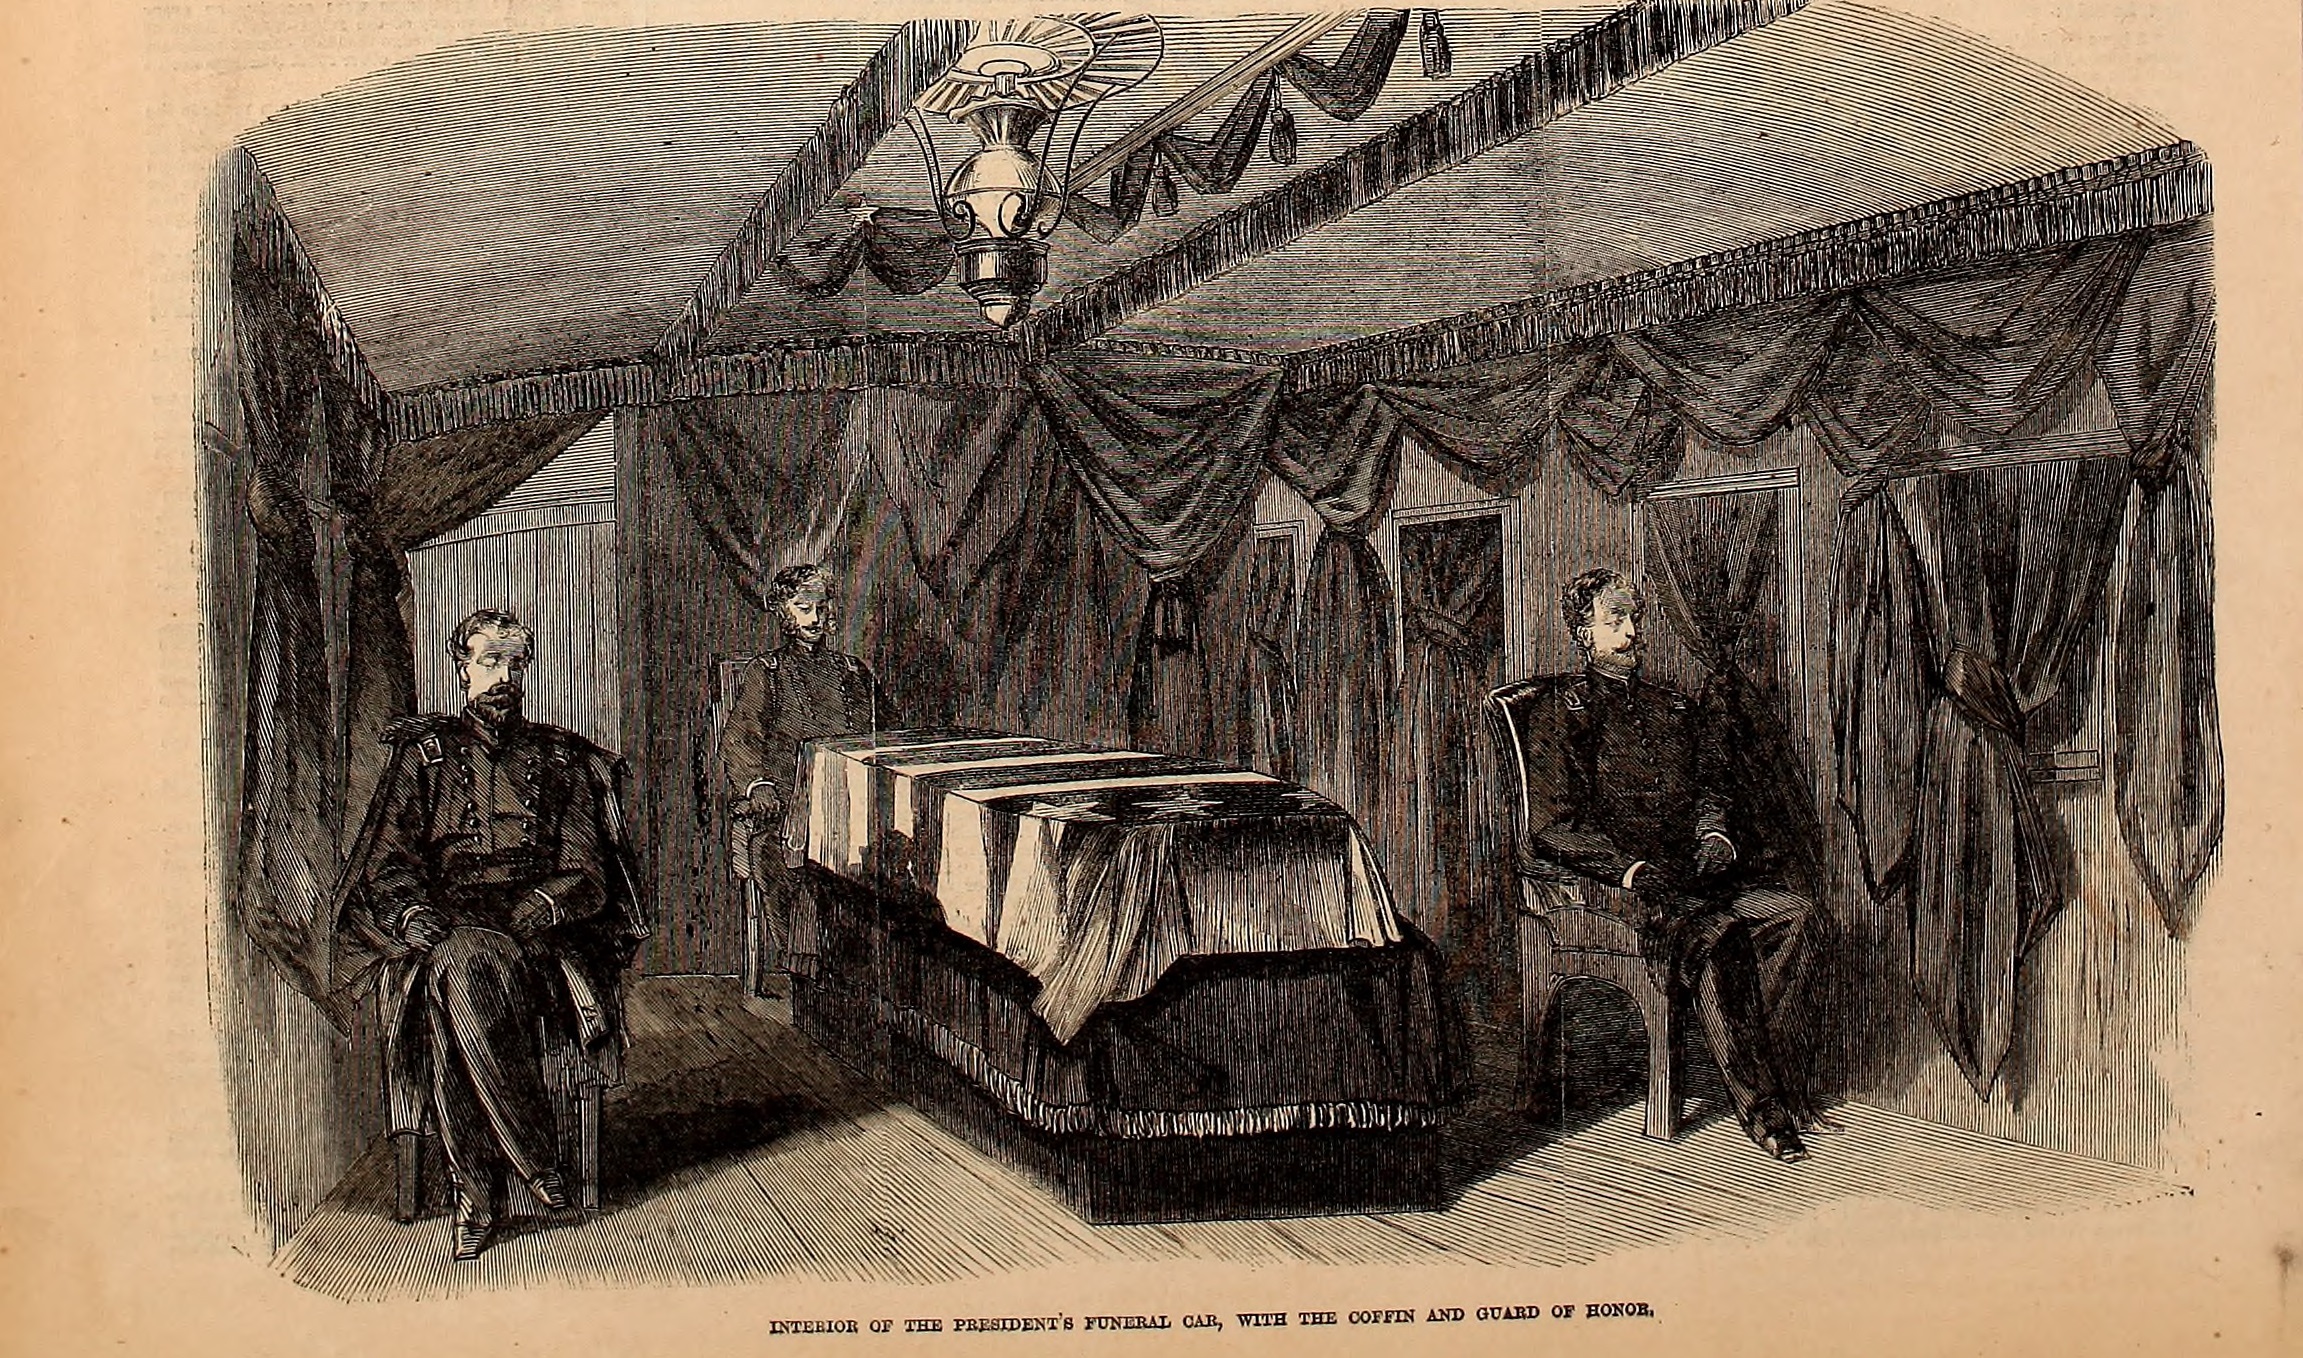 President Lincoln's Funeral Train, Interior - Frank Leslie's Illustrated Newspaper Drawing